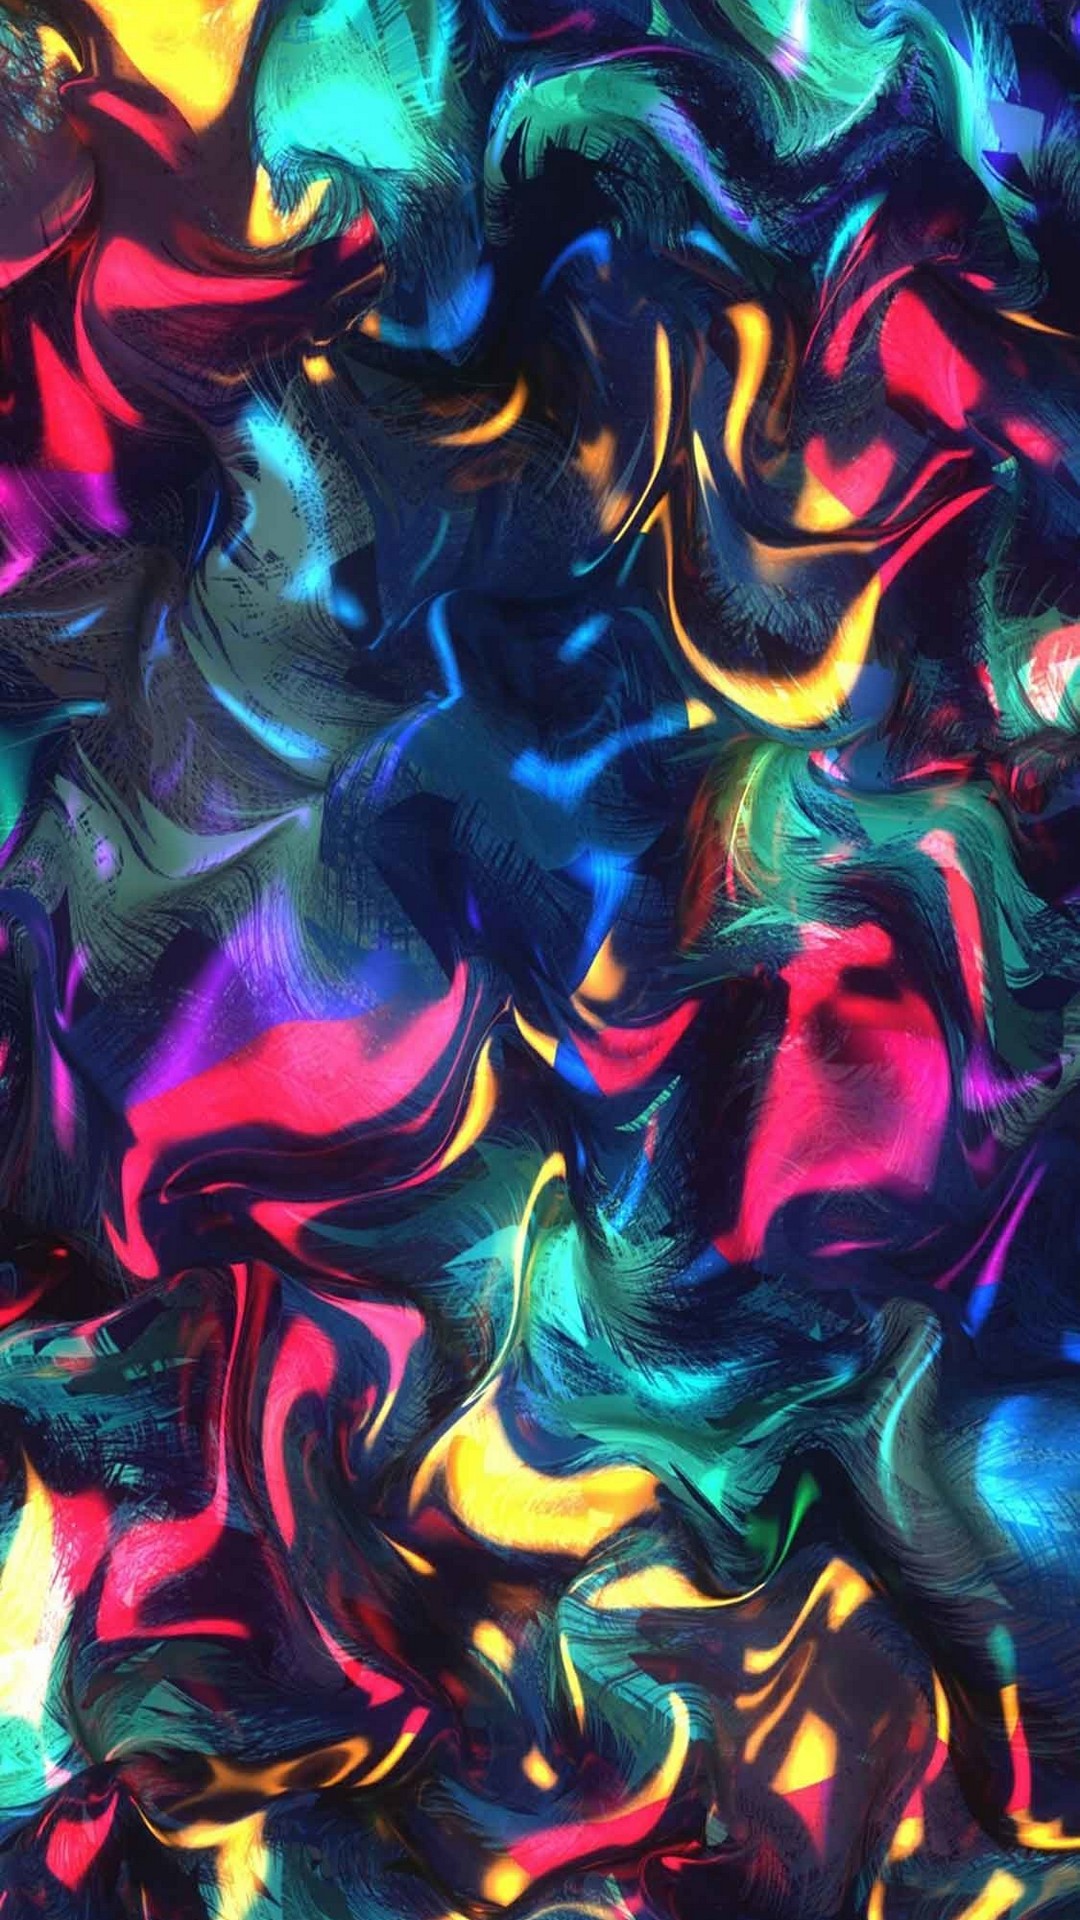 Android Wallpaper Dark Colorful With high-resolution 1080X1920 pixel. You can use this wallpaper for your Android backgrounds, Tablet, Samsung Screensavers, Mobile Phone Lock Screen and another Smartphones device